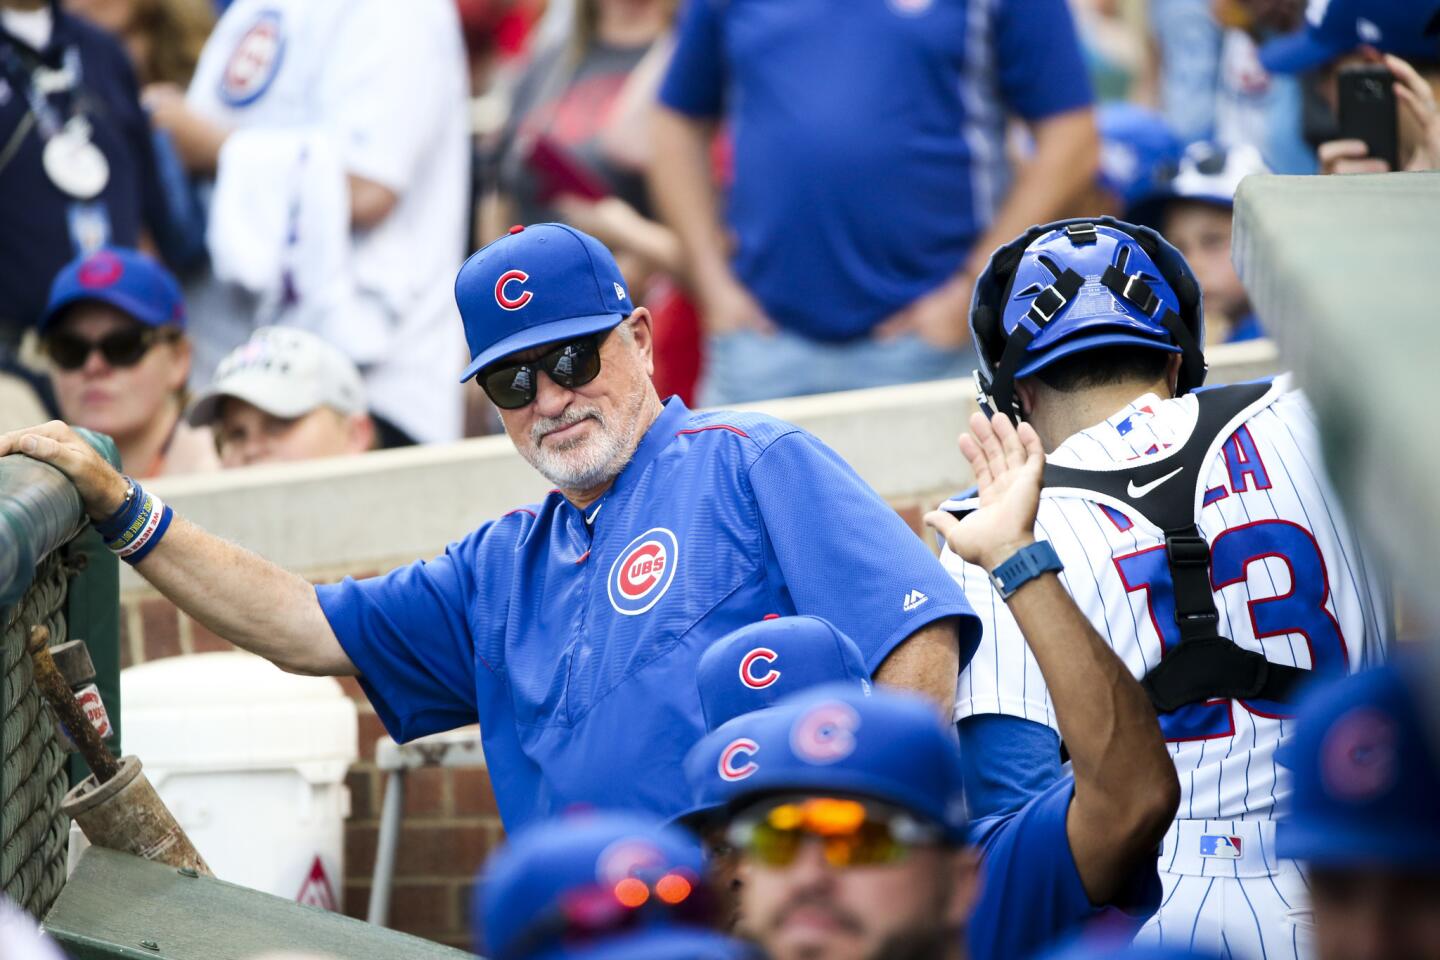 Cubs manager Joe Maddon stands in the dugout before the first inning against the Cardinals at Wrigley Field on Sunday, Sept. 17, 2017.